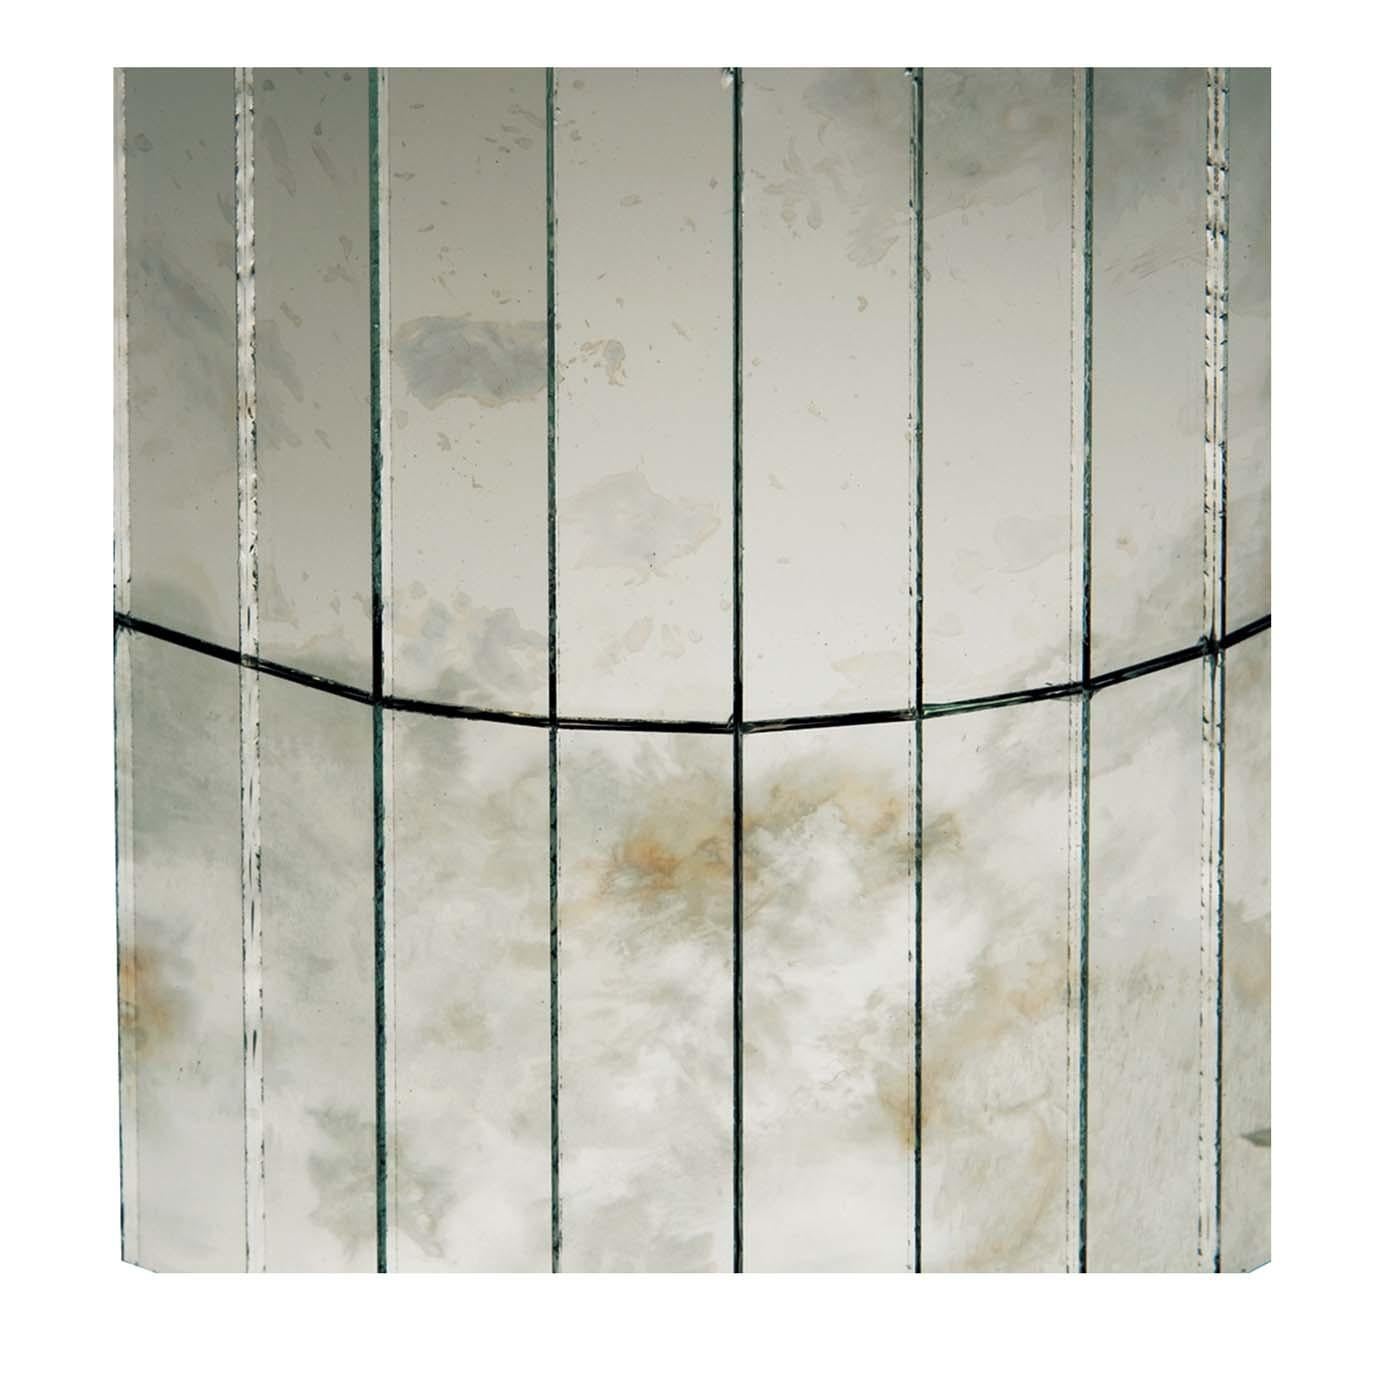 The gray and dust speckled hues on these canvased mosaic glass panels by Antique Mirror evoke the icy gasses of the namesake ringed planet in our solar system. These muted and tenuous tones complement any wall or surface in a minimalist or modern